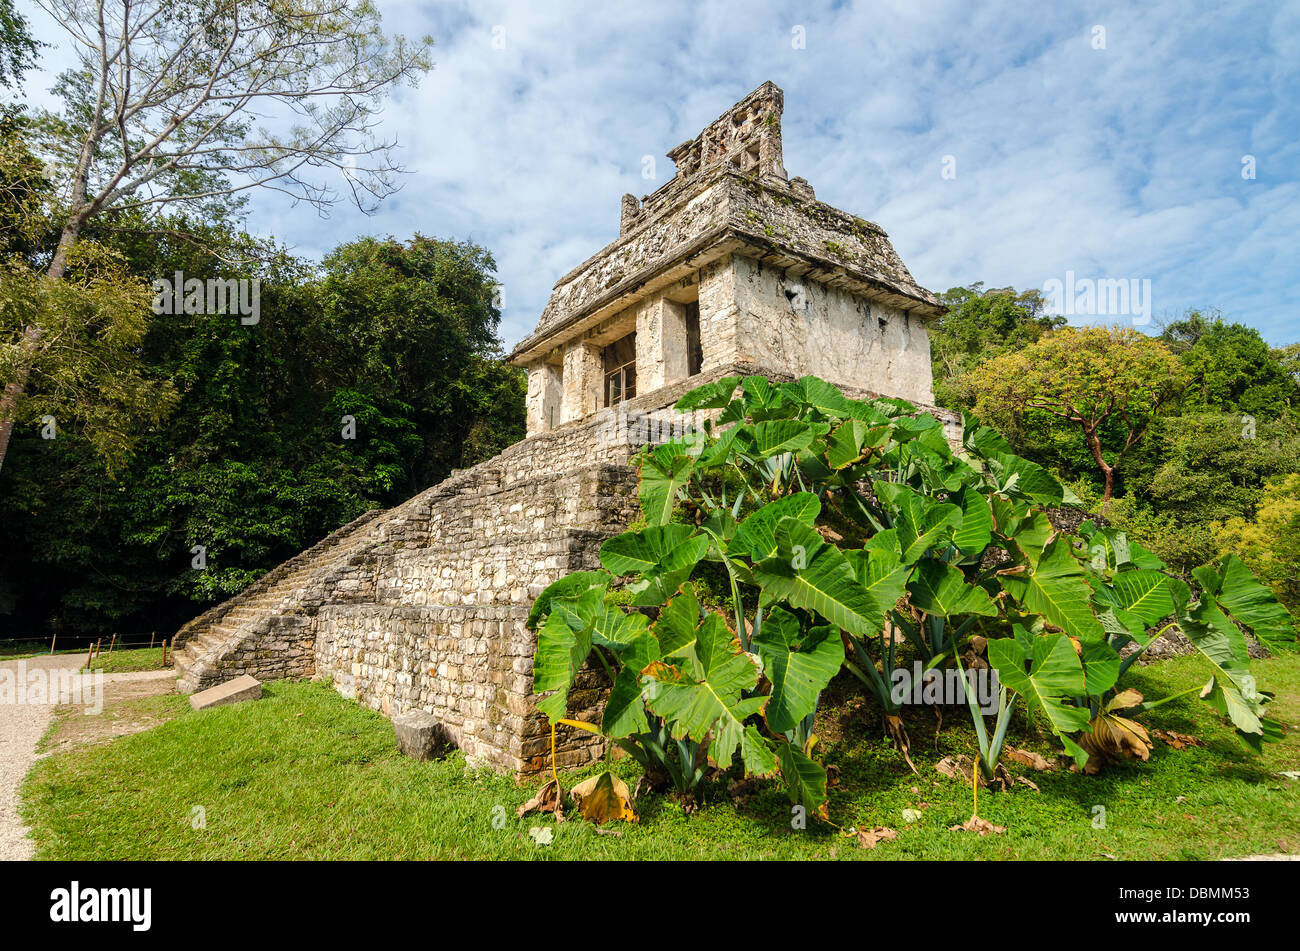 Ancient Mayan temple and lush green foliage at Palenque in Chiapas, Mexico Stock Photo